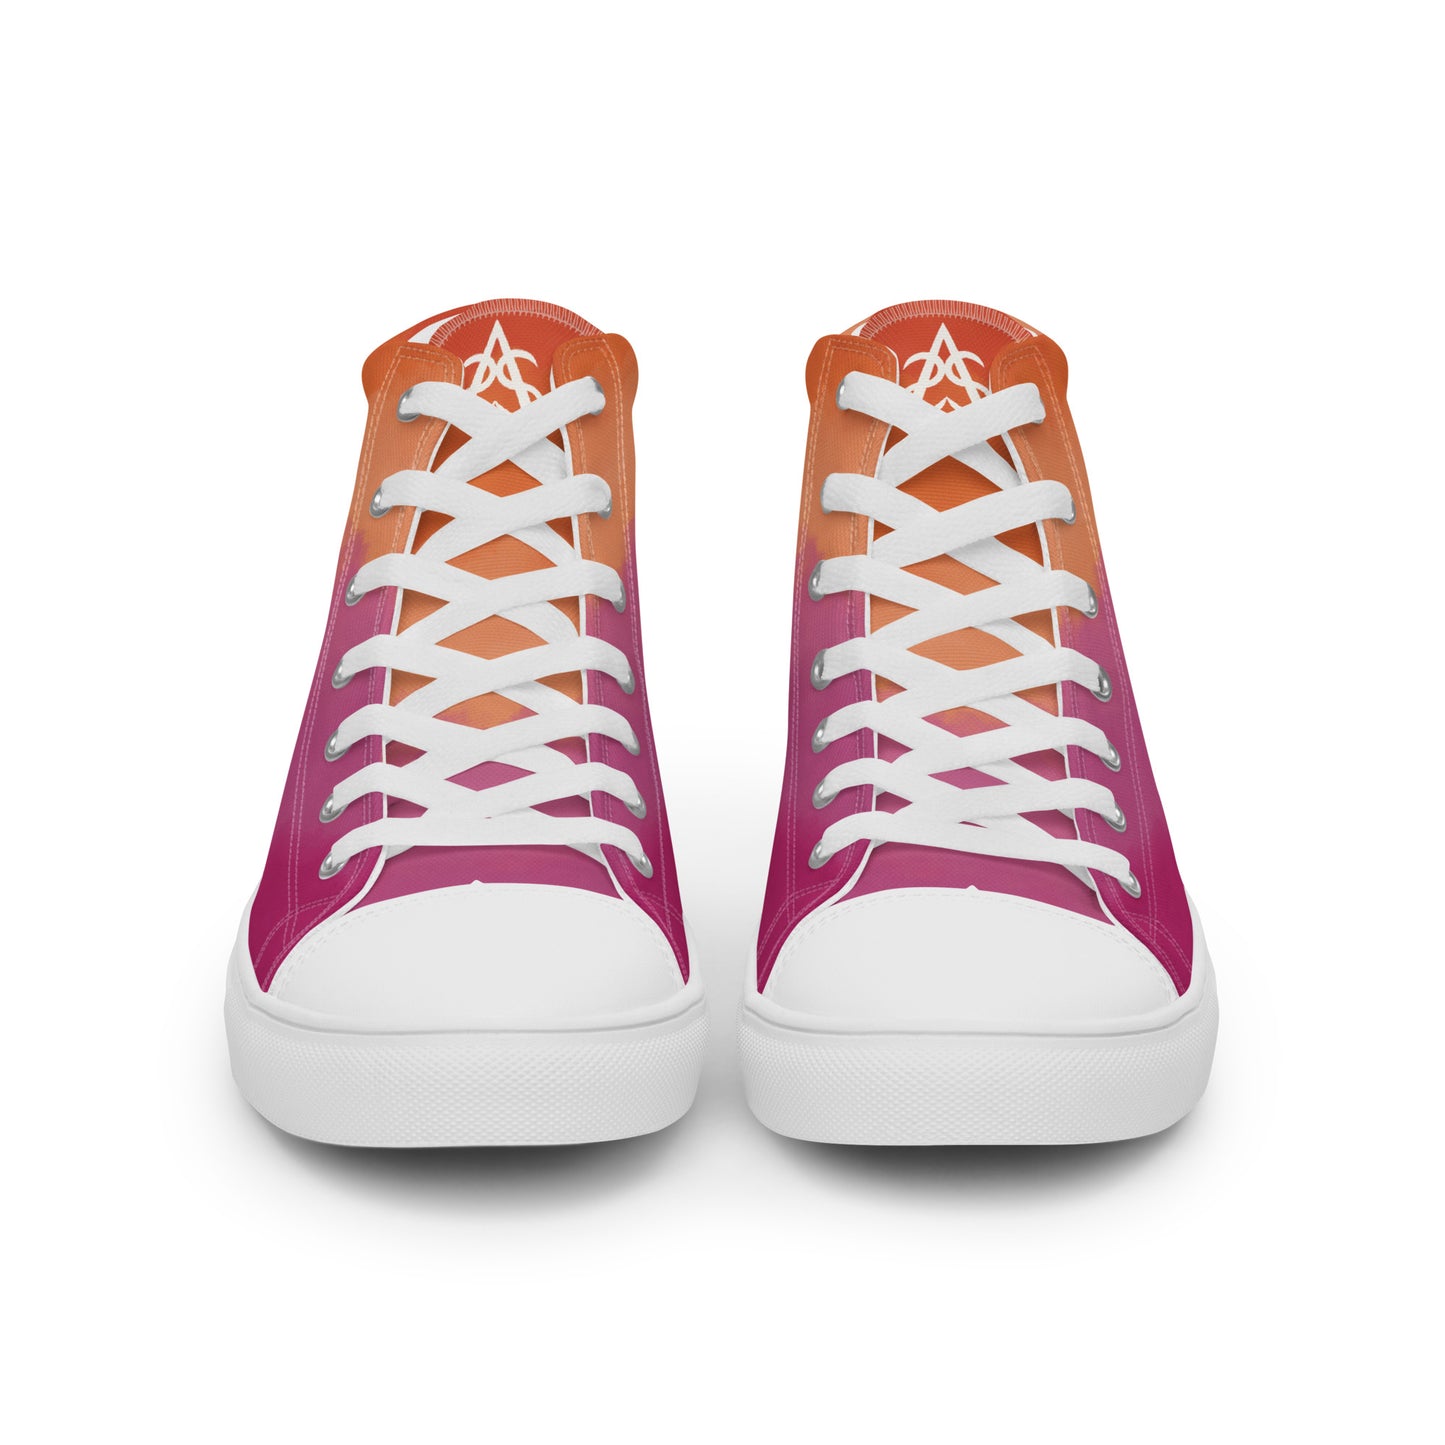 Front view: A pair of high top shoes with cloud layers in the lesbian flag colors, a white heart on the heel, and the Aras Sivad Studio logo on the tongue.